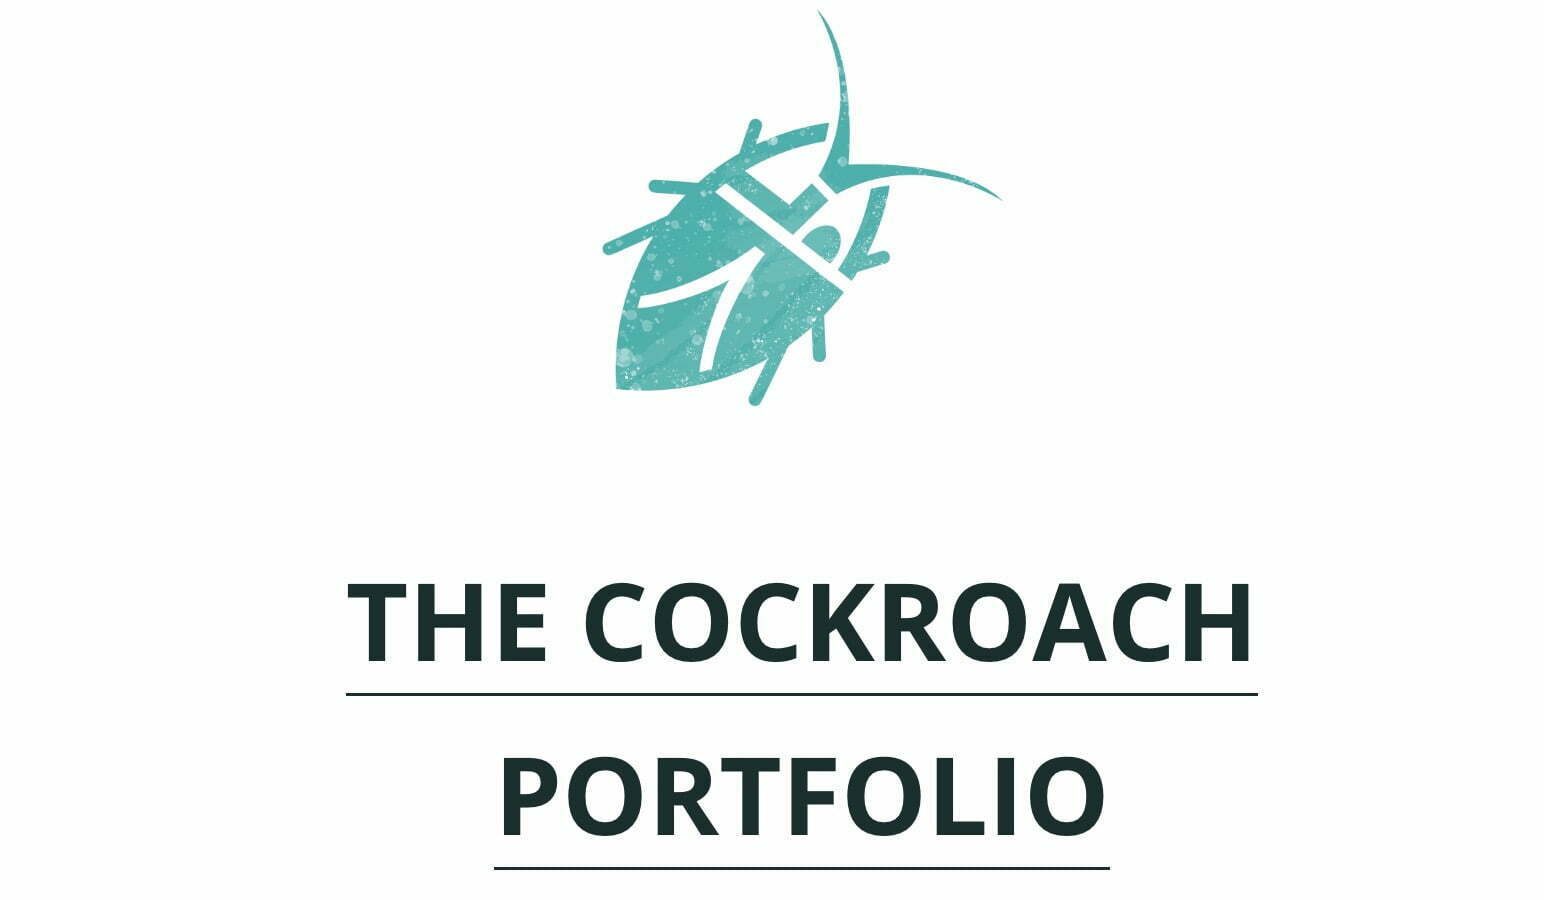 The Cockroach Portfolio: The Strategy Behind the Offensive + Defensive “Least Shitty Portfolio” with Jason Buck